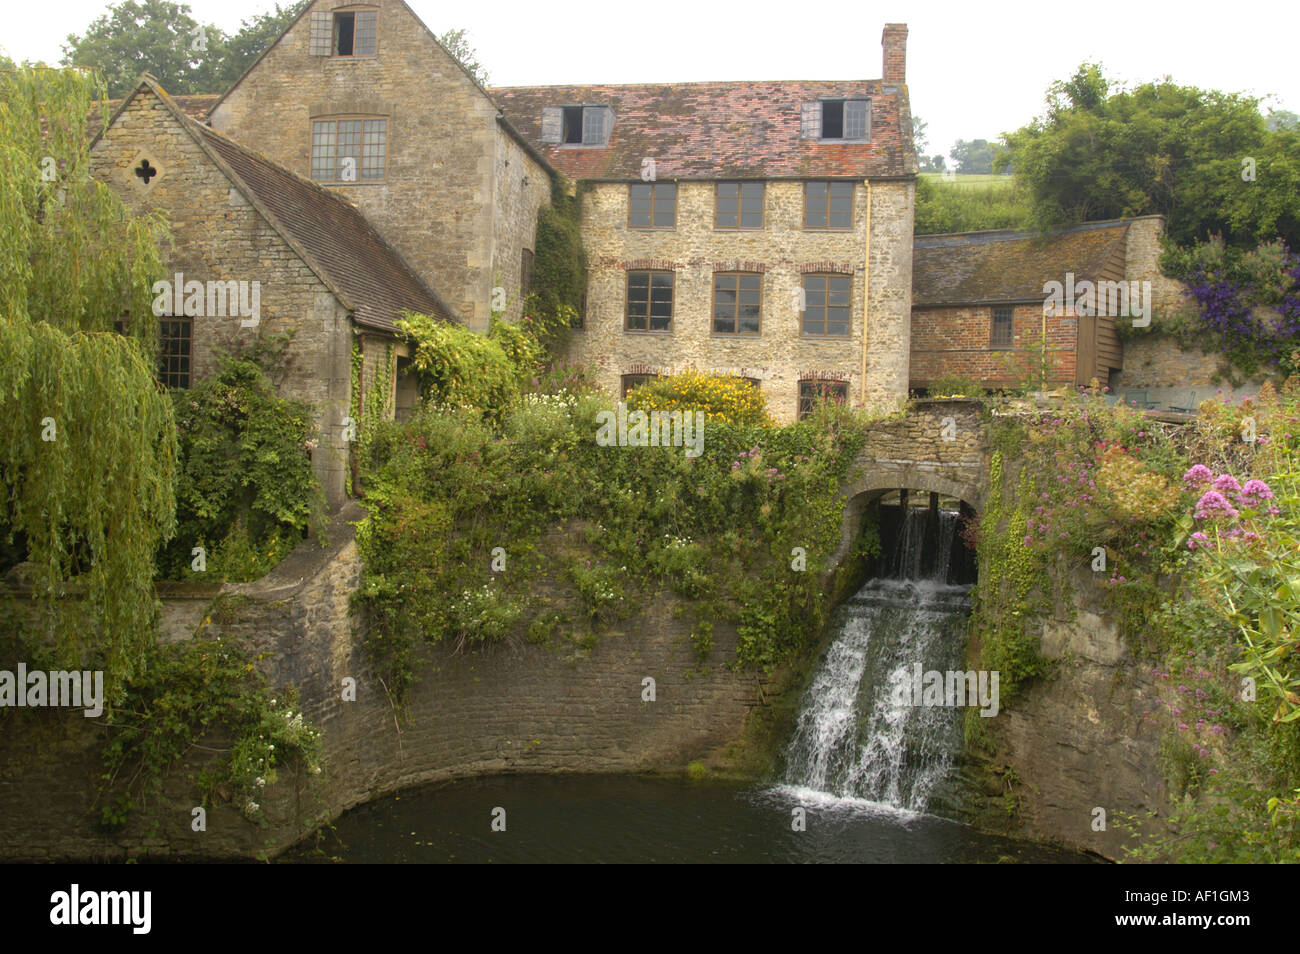 Mini hydro electric power station 12kw installed power produces around 33 000 Kwh per year Near Bruton Somerset England Stock Photo